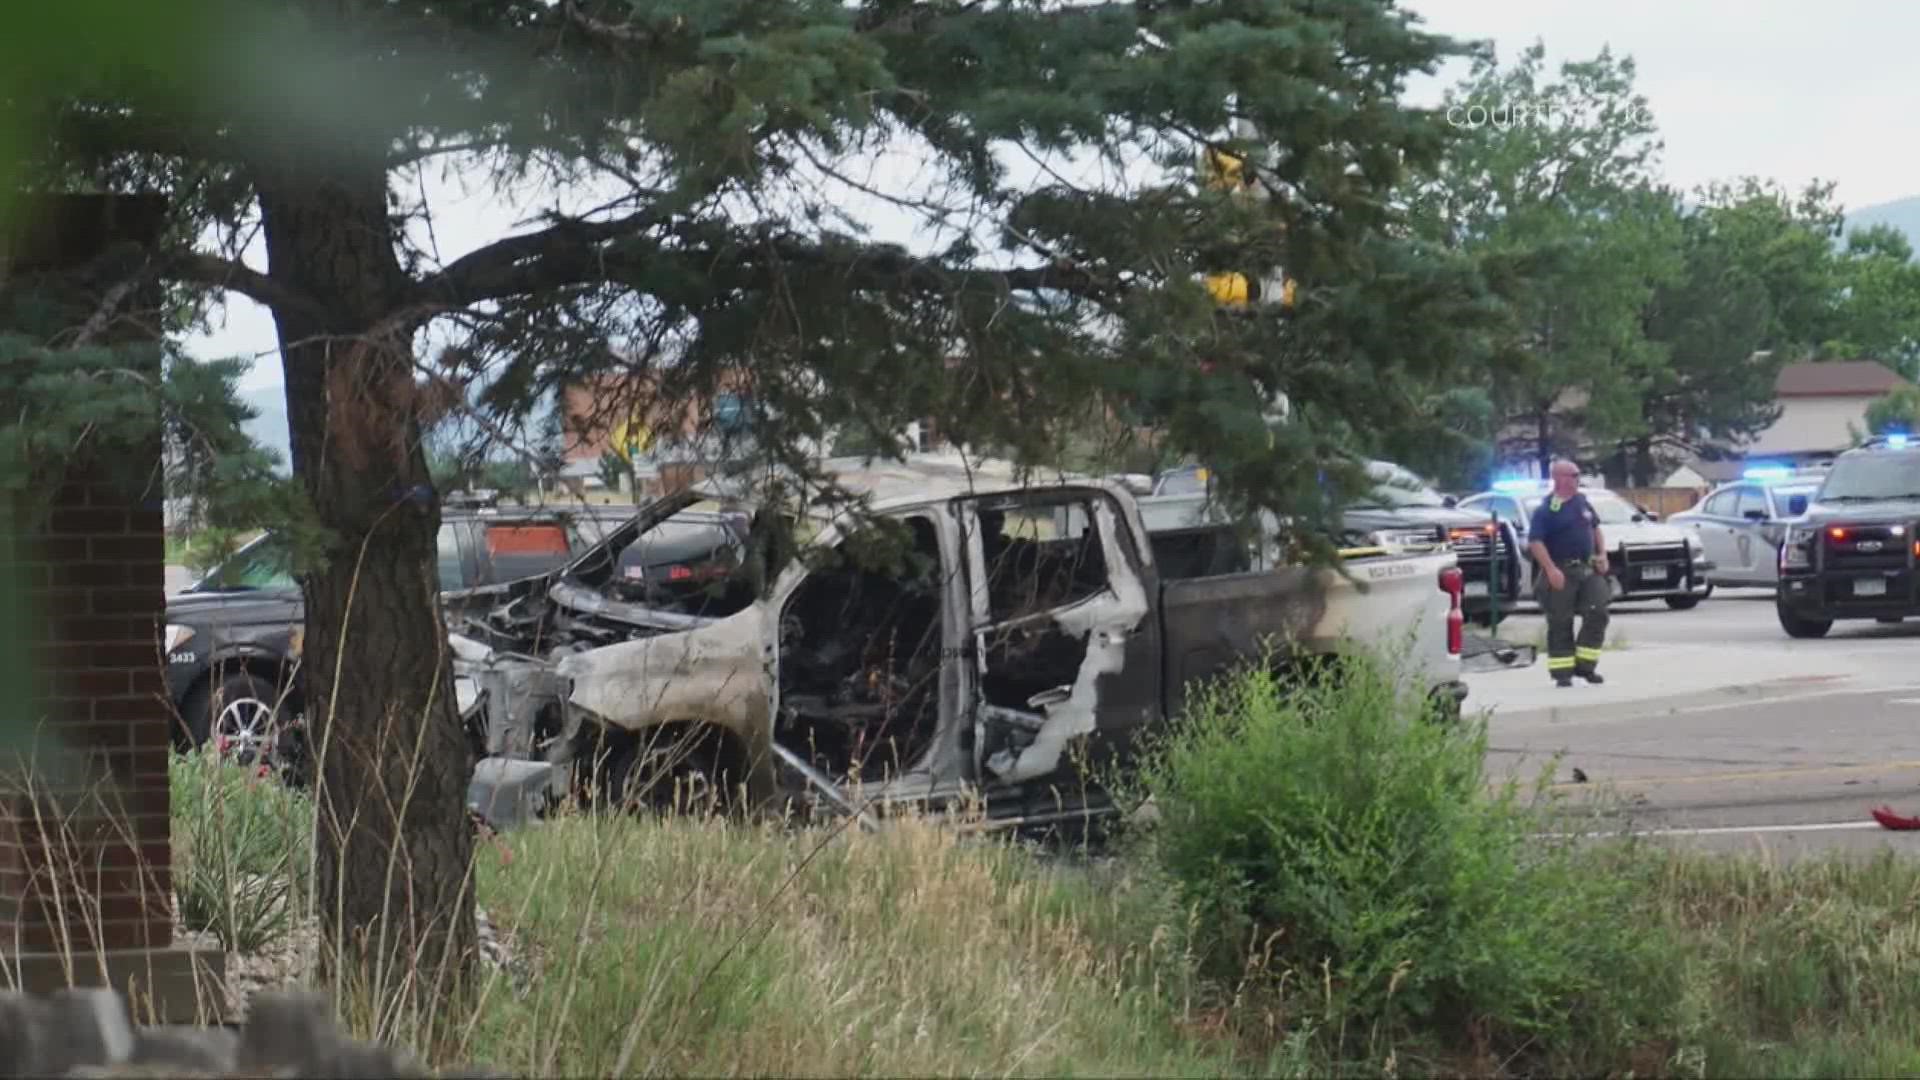 State investigators are looking into a fatal crash involving an off-duty Denver police officer and a motorcyclist who died with meth and marijuana in his system.